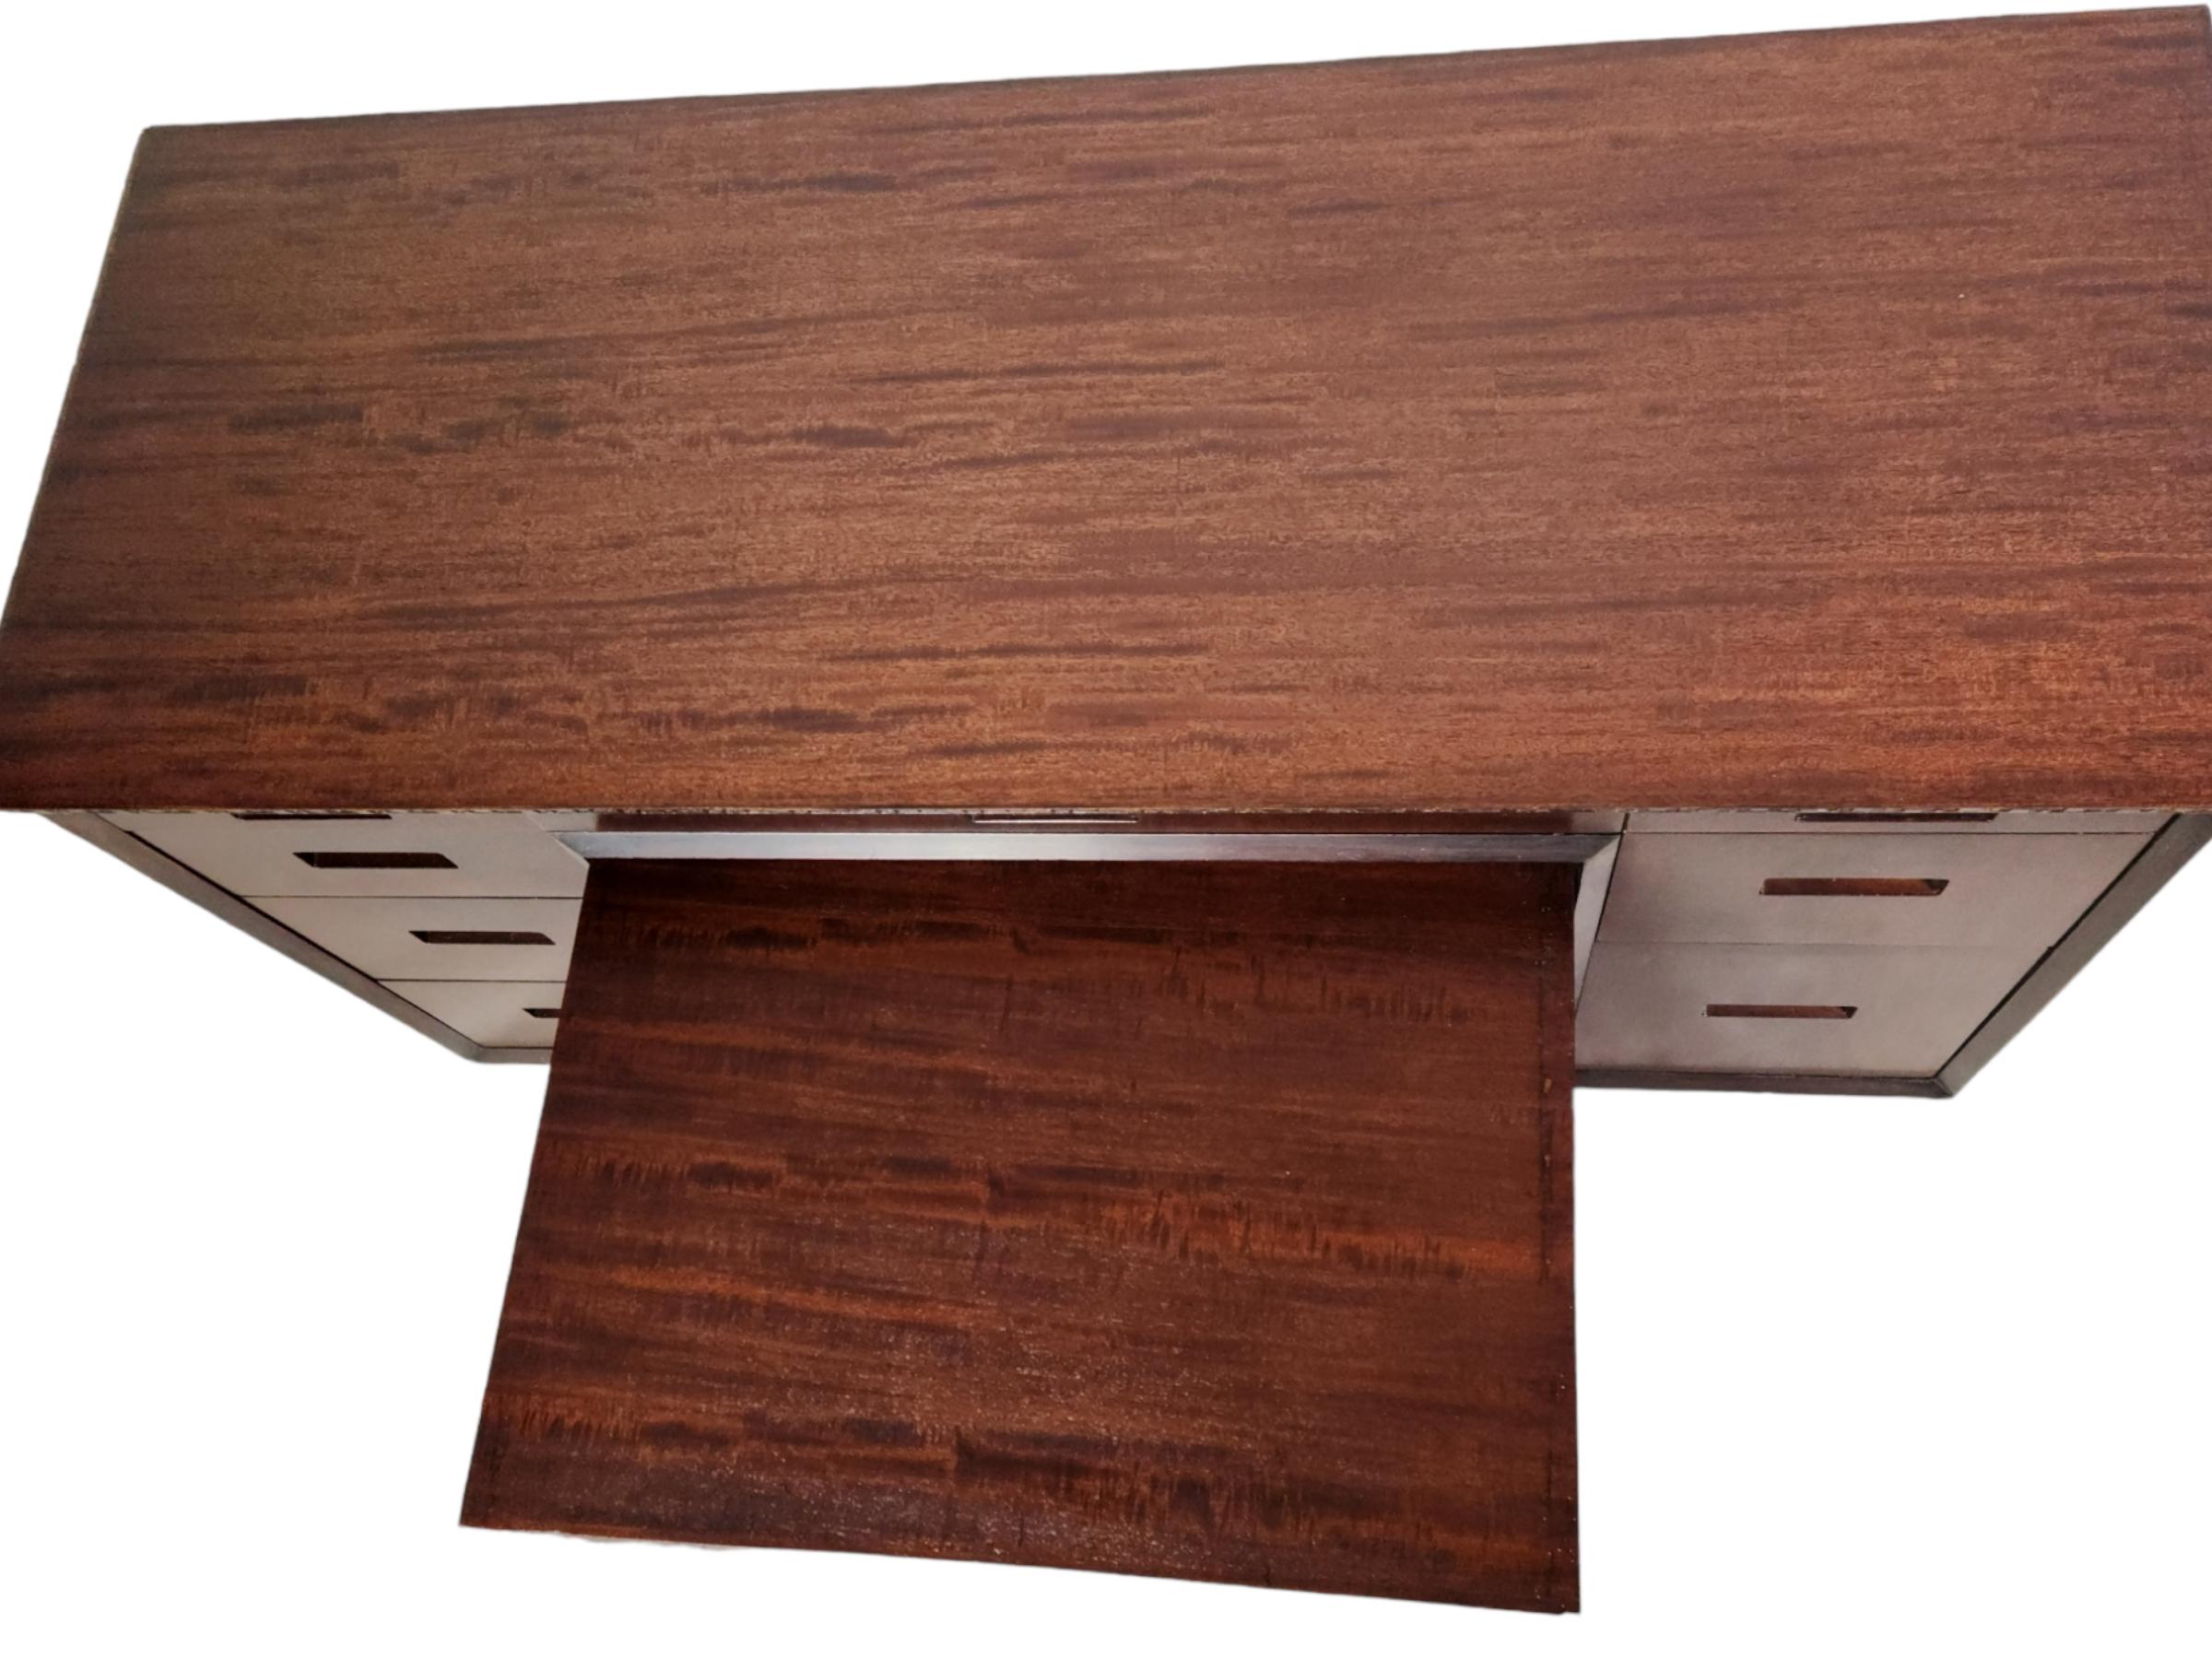 Carved Frank Lloyd Wright Taliesin Mahogany Desk +Typing Table Heritage Henredon, 1955 For Sale